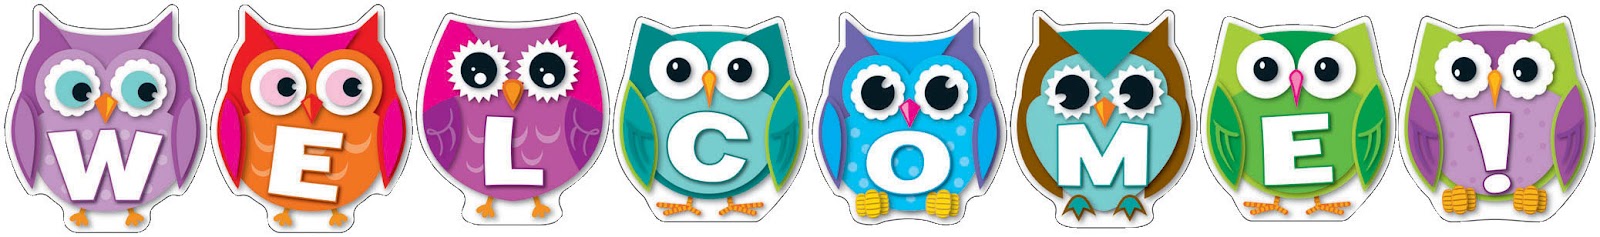 Welcome owl clipart